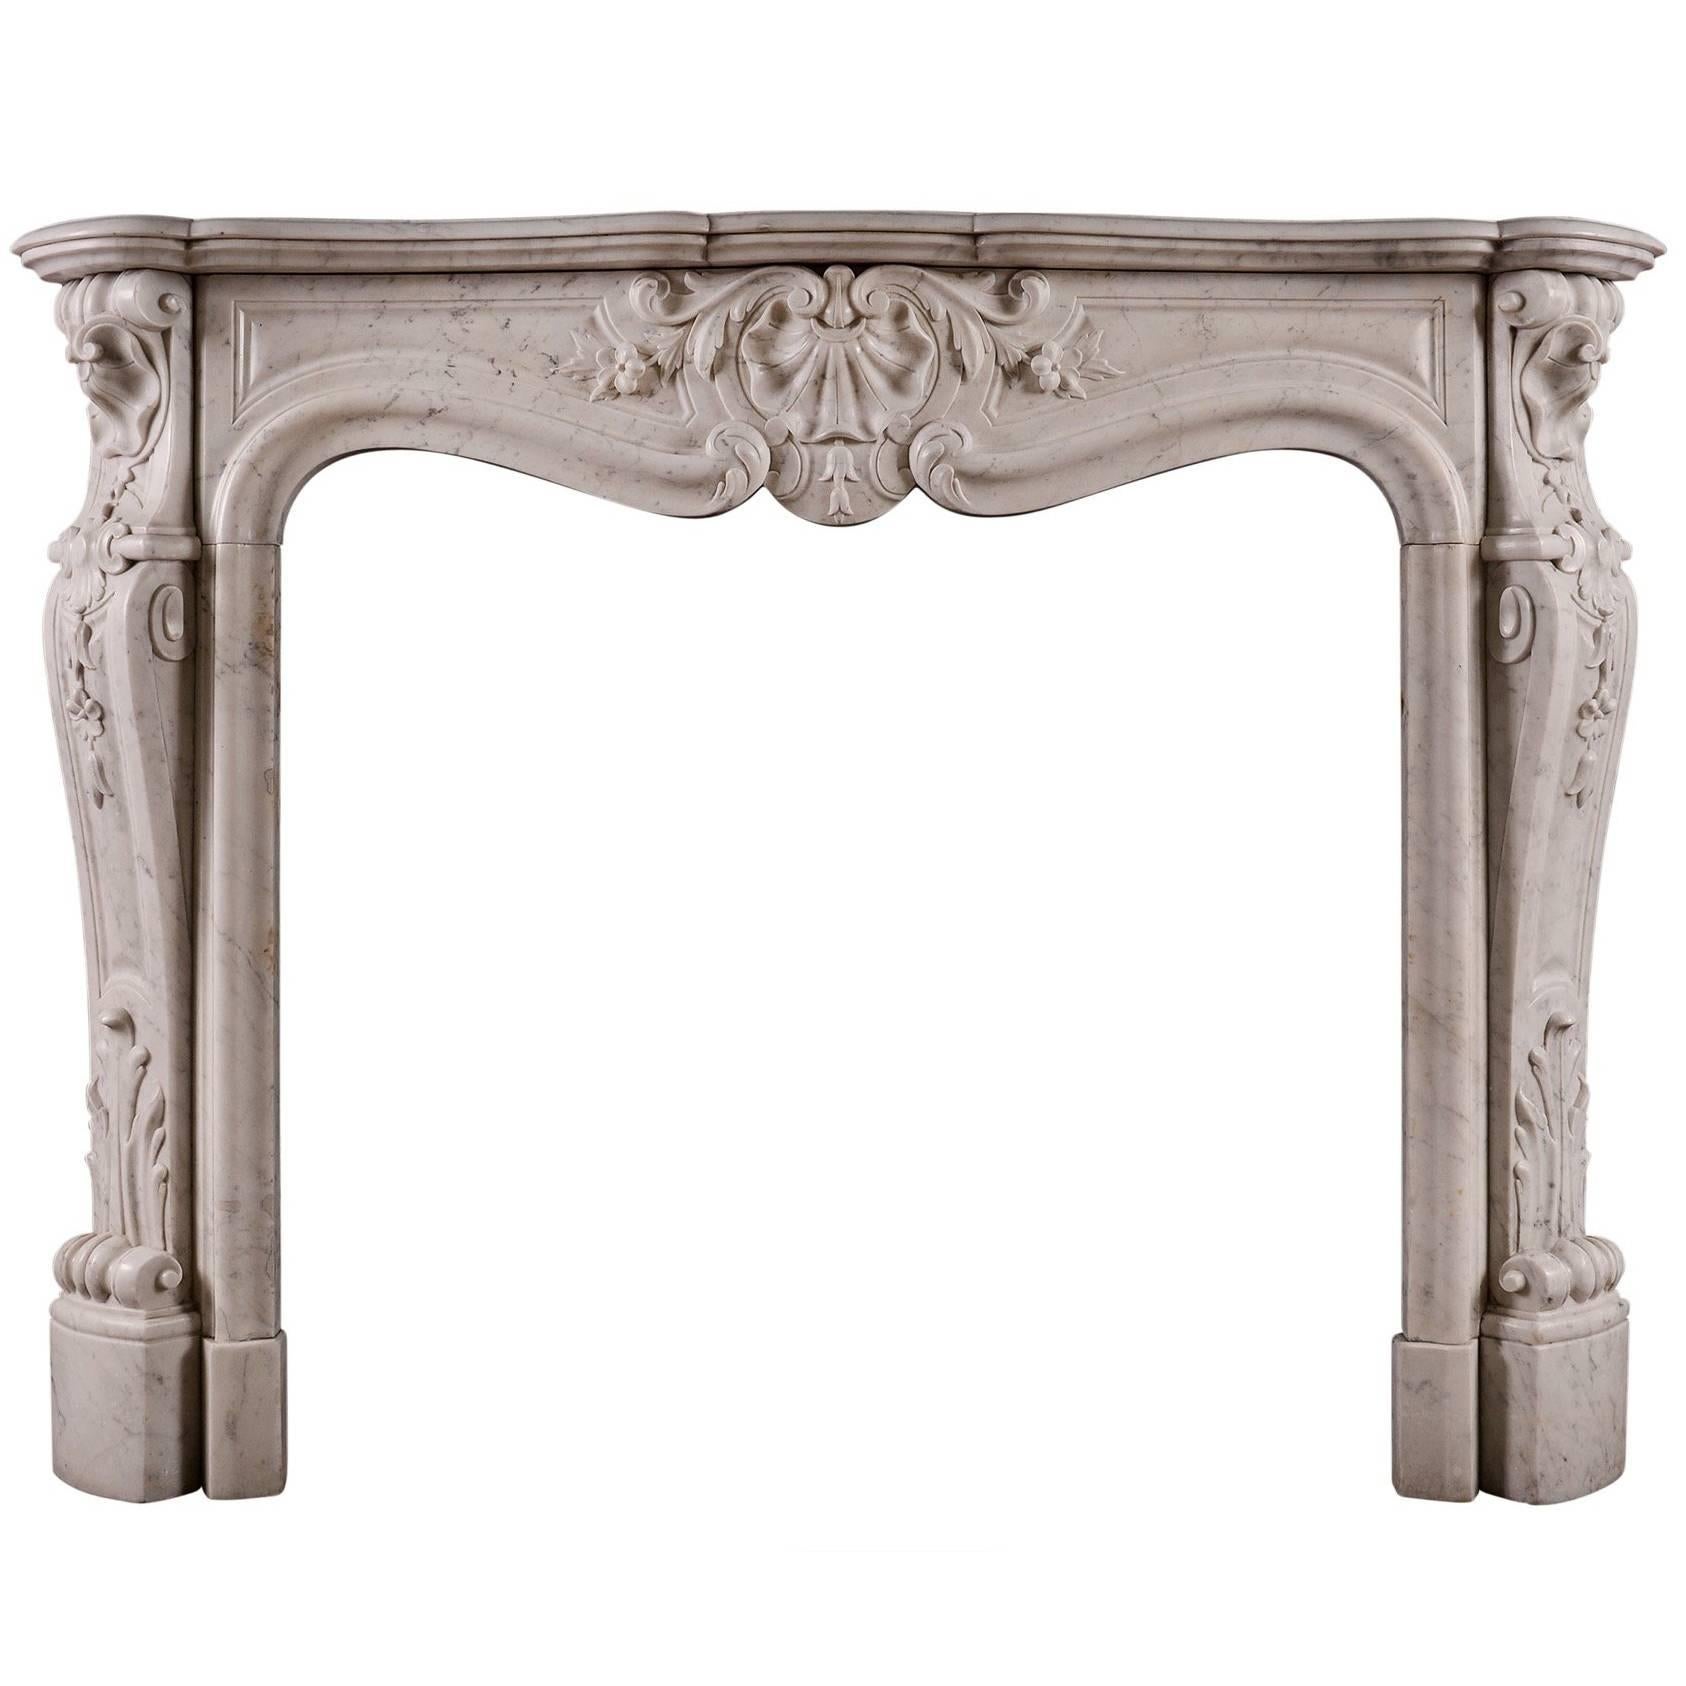 French Louis XVI Style Carrara Marble Fireplace